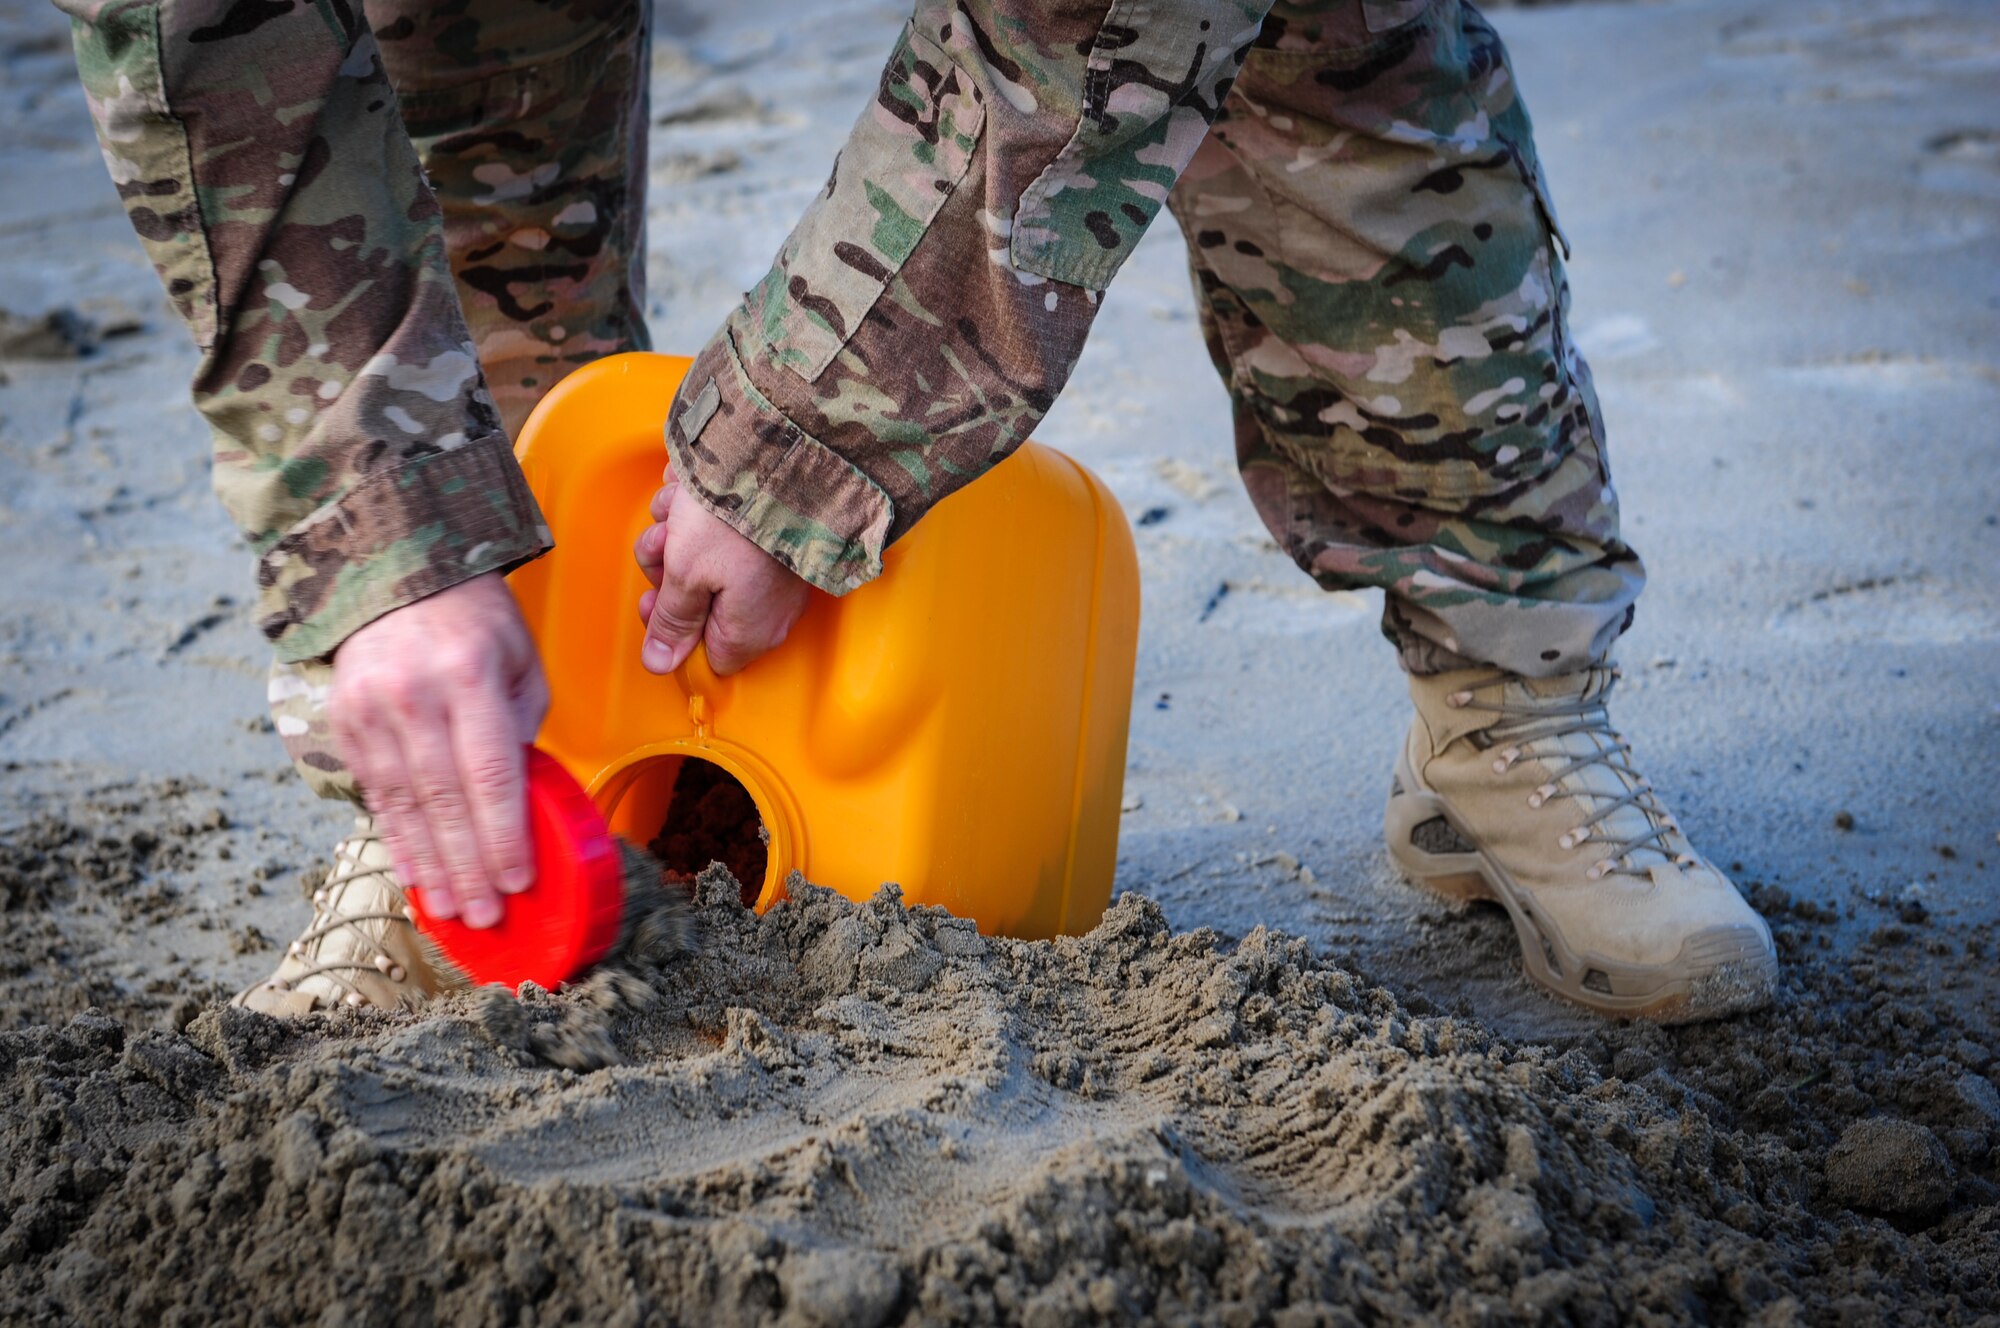 Tech. Sgt. Brian Shepherd, an explosive ordnance disposal craftsman with the 1st Special Operations Civil Engineer Squadron, packs sand into a jug to mimic explosive residue from a partially detonated improvised explosive device at Hurlburt Field, Fla., Nov. 19, 2015. Wood boxes, plastic containers and backpacks are some items that can be used to make an improvised explosive device, as well as multiple types of batteries. (U.S. Air Force photo by Senior Airman Meagan Schutter)